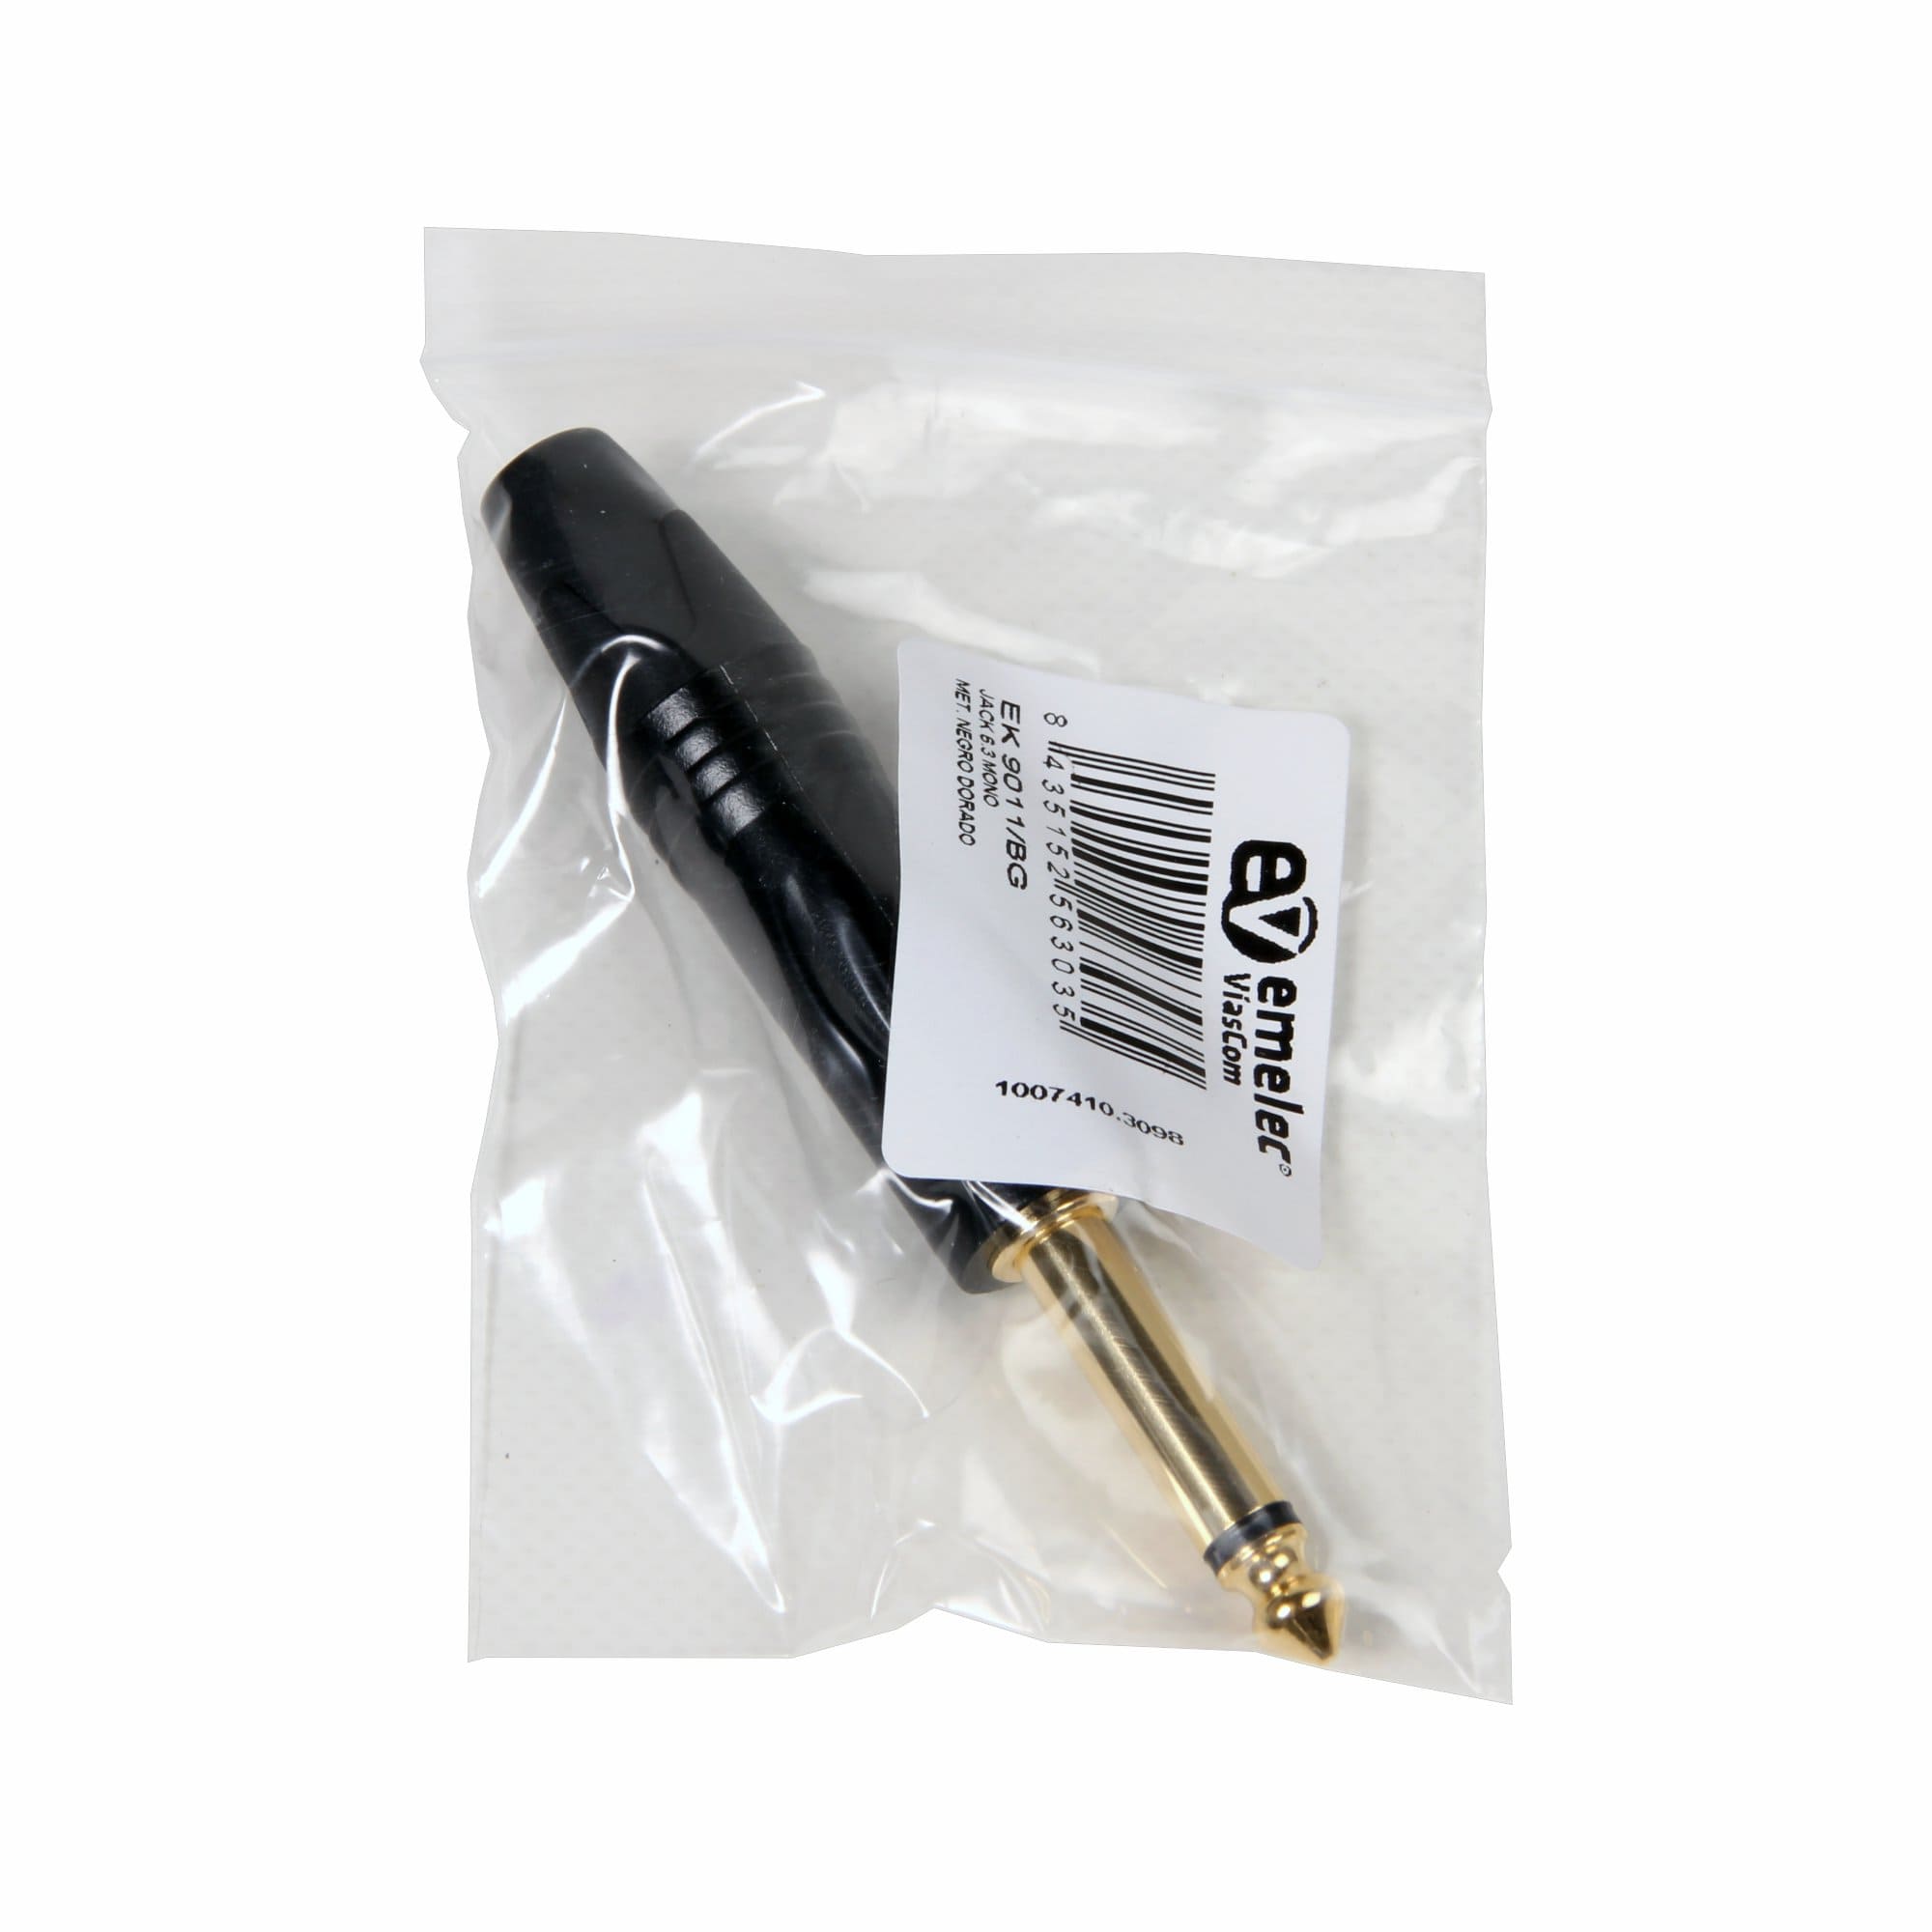 Individual plastic bag with Jack 6.3 mono male connector black and gold from Emelec VíasCom